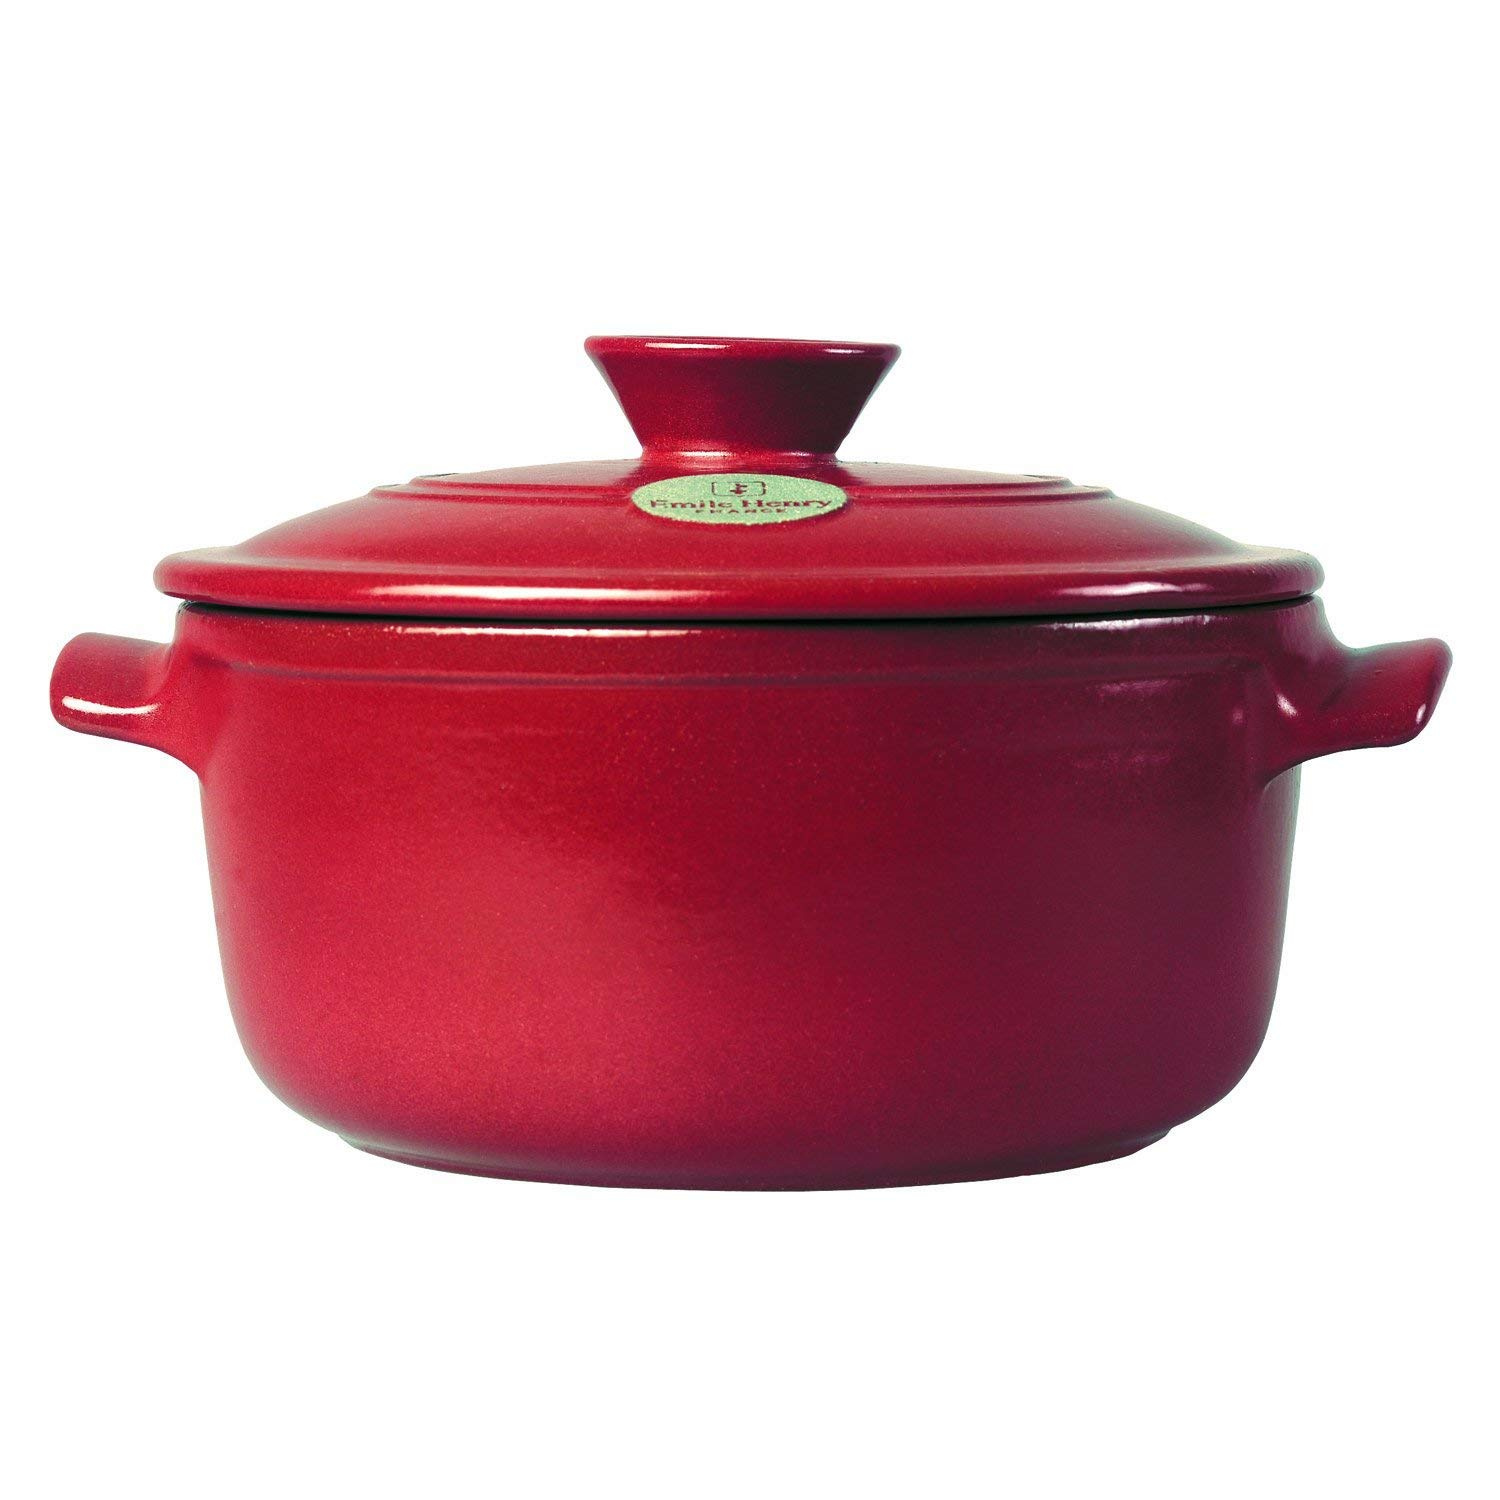 Emile Henry Flame Round Stewpot, Burgundy